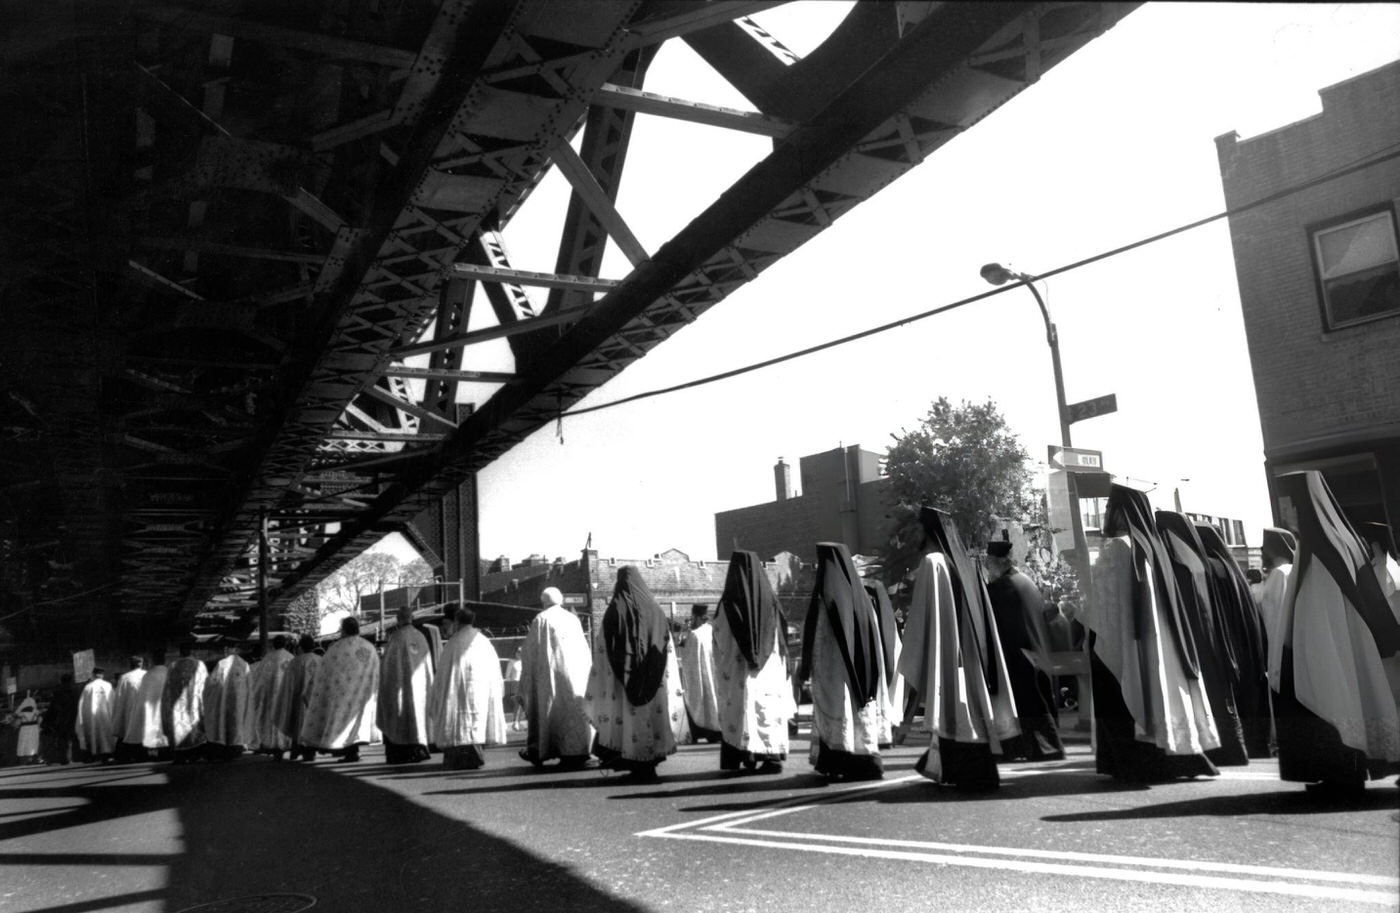 Greek Orthodox Priests March In A Procession To Honor A Visit By The Greek Patriarch In The Astoria Neighborhood Of Queens, 1998.